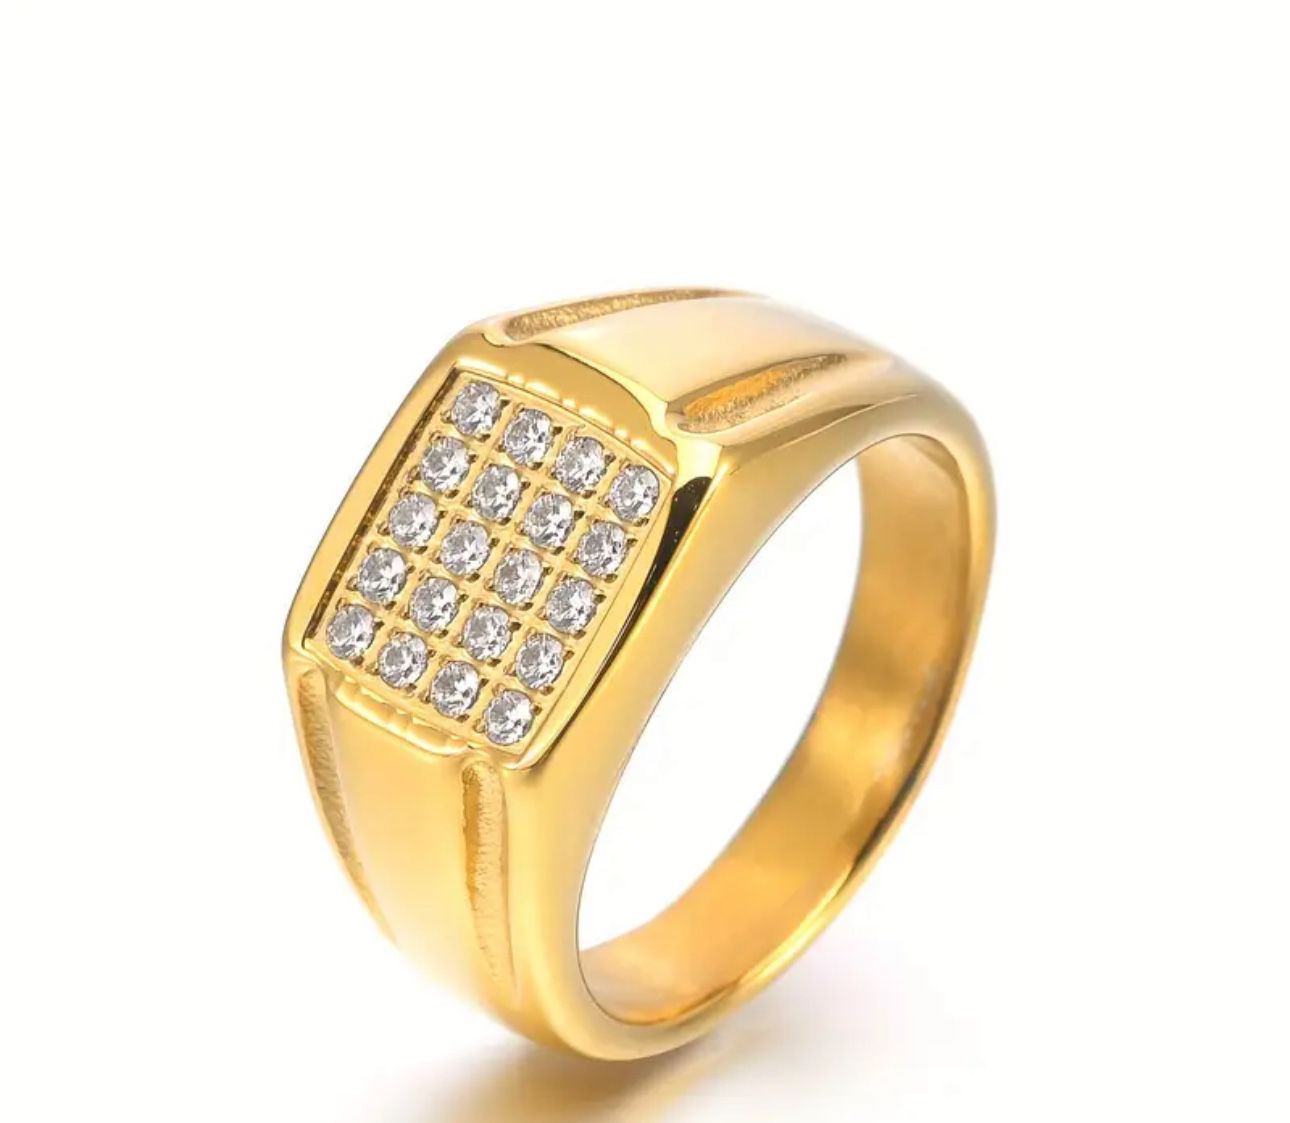 Trendy 18 k gold plated Stainless Steel Ring, Cubic Zirconia Encrusted Men's Ring, HipHop Ring